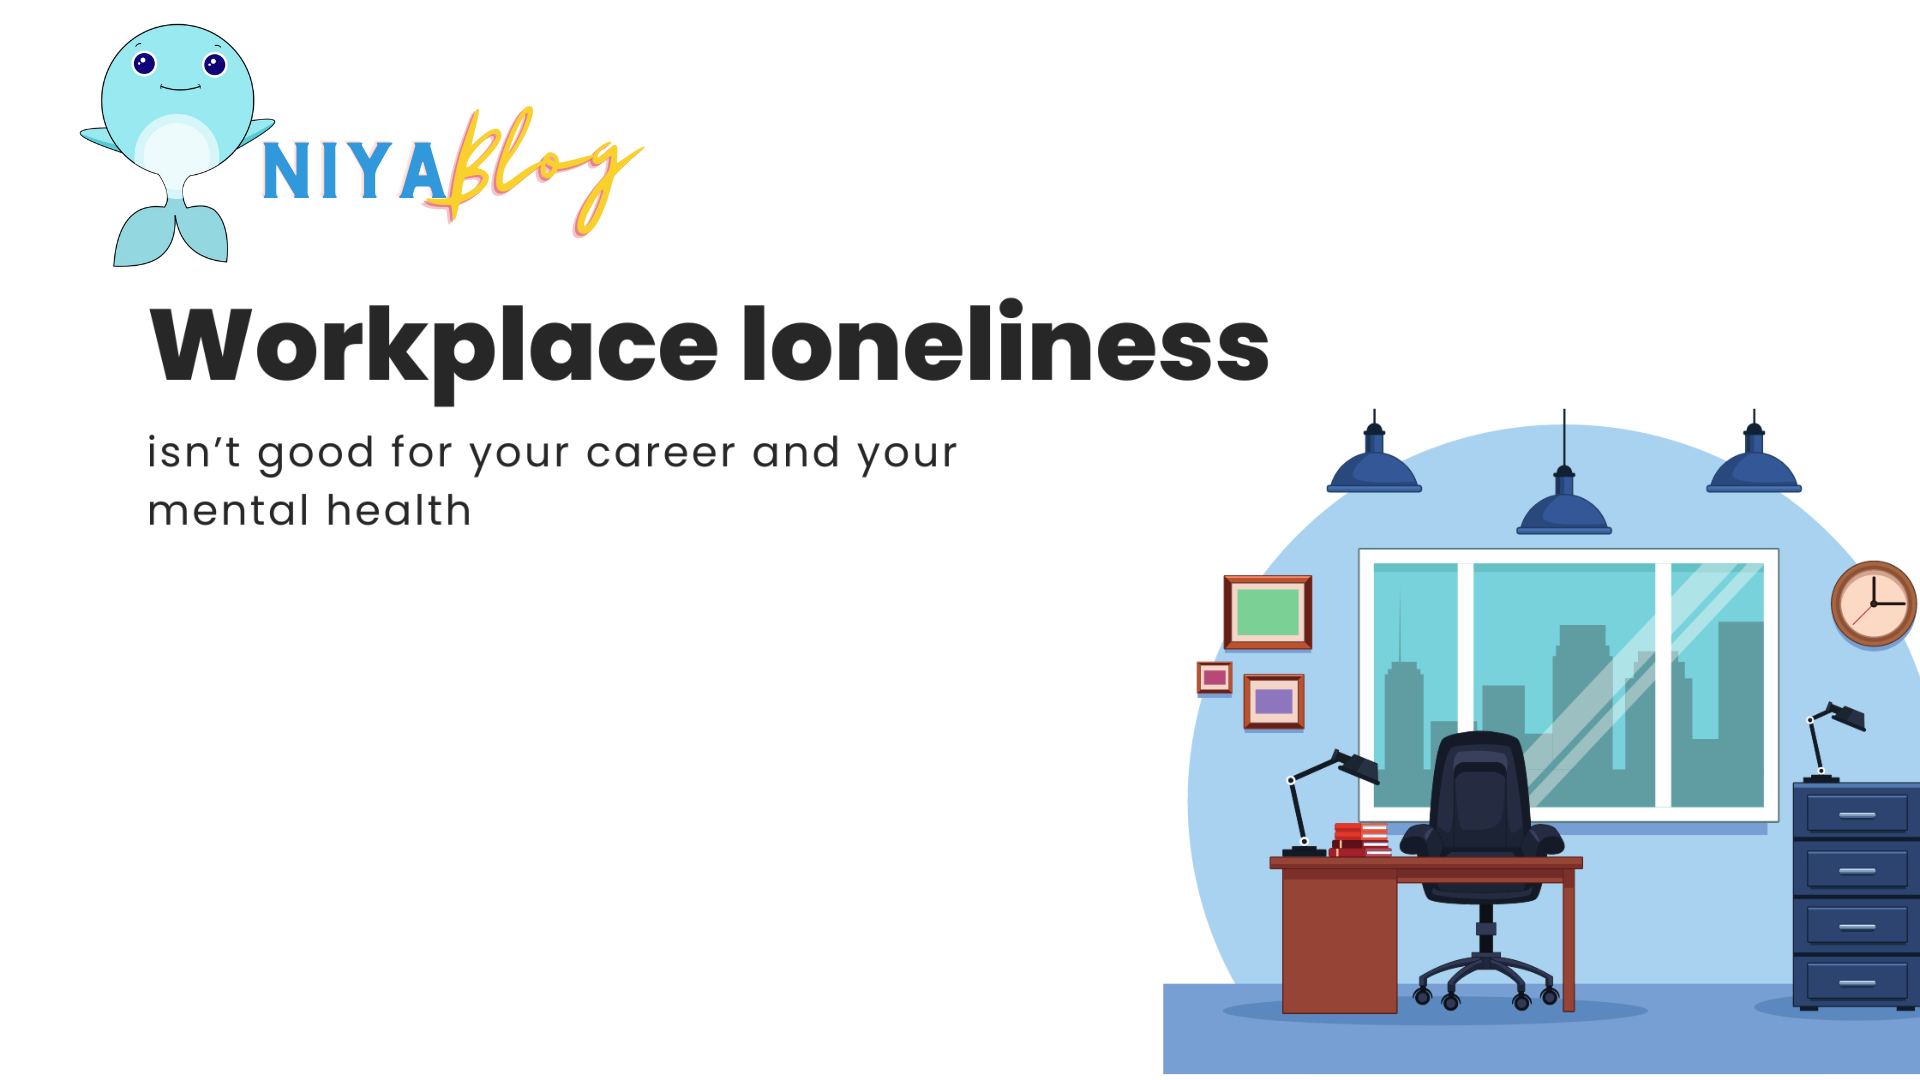 Impact of loneliness at work